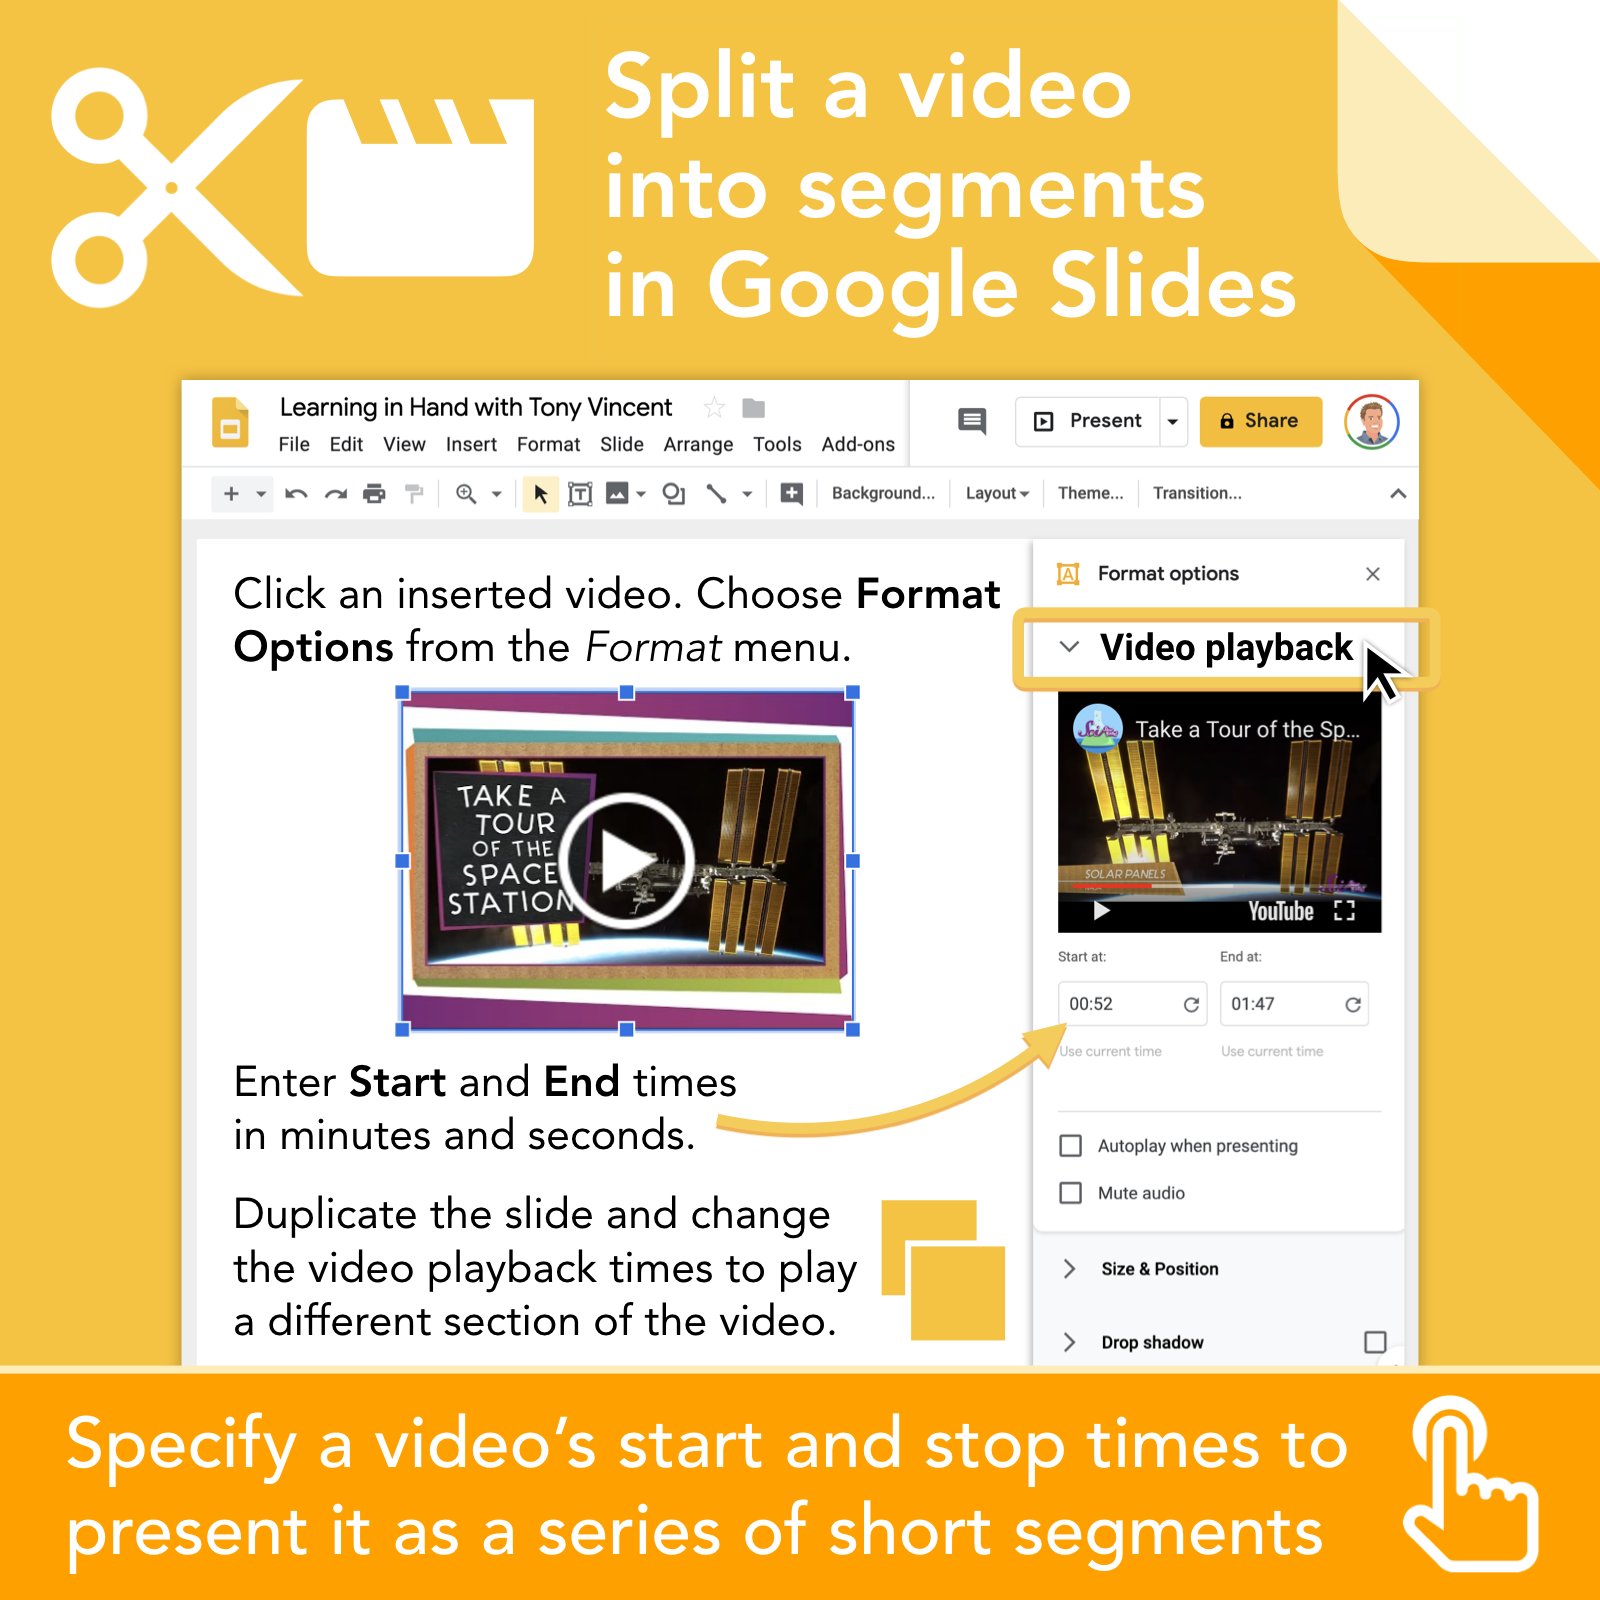 ✂️ There are a variety of ways to chunk a video. One way is to use Google Slides. https://t.co/Xpw1esWdrV